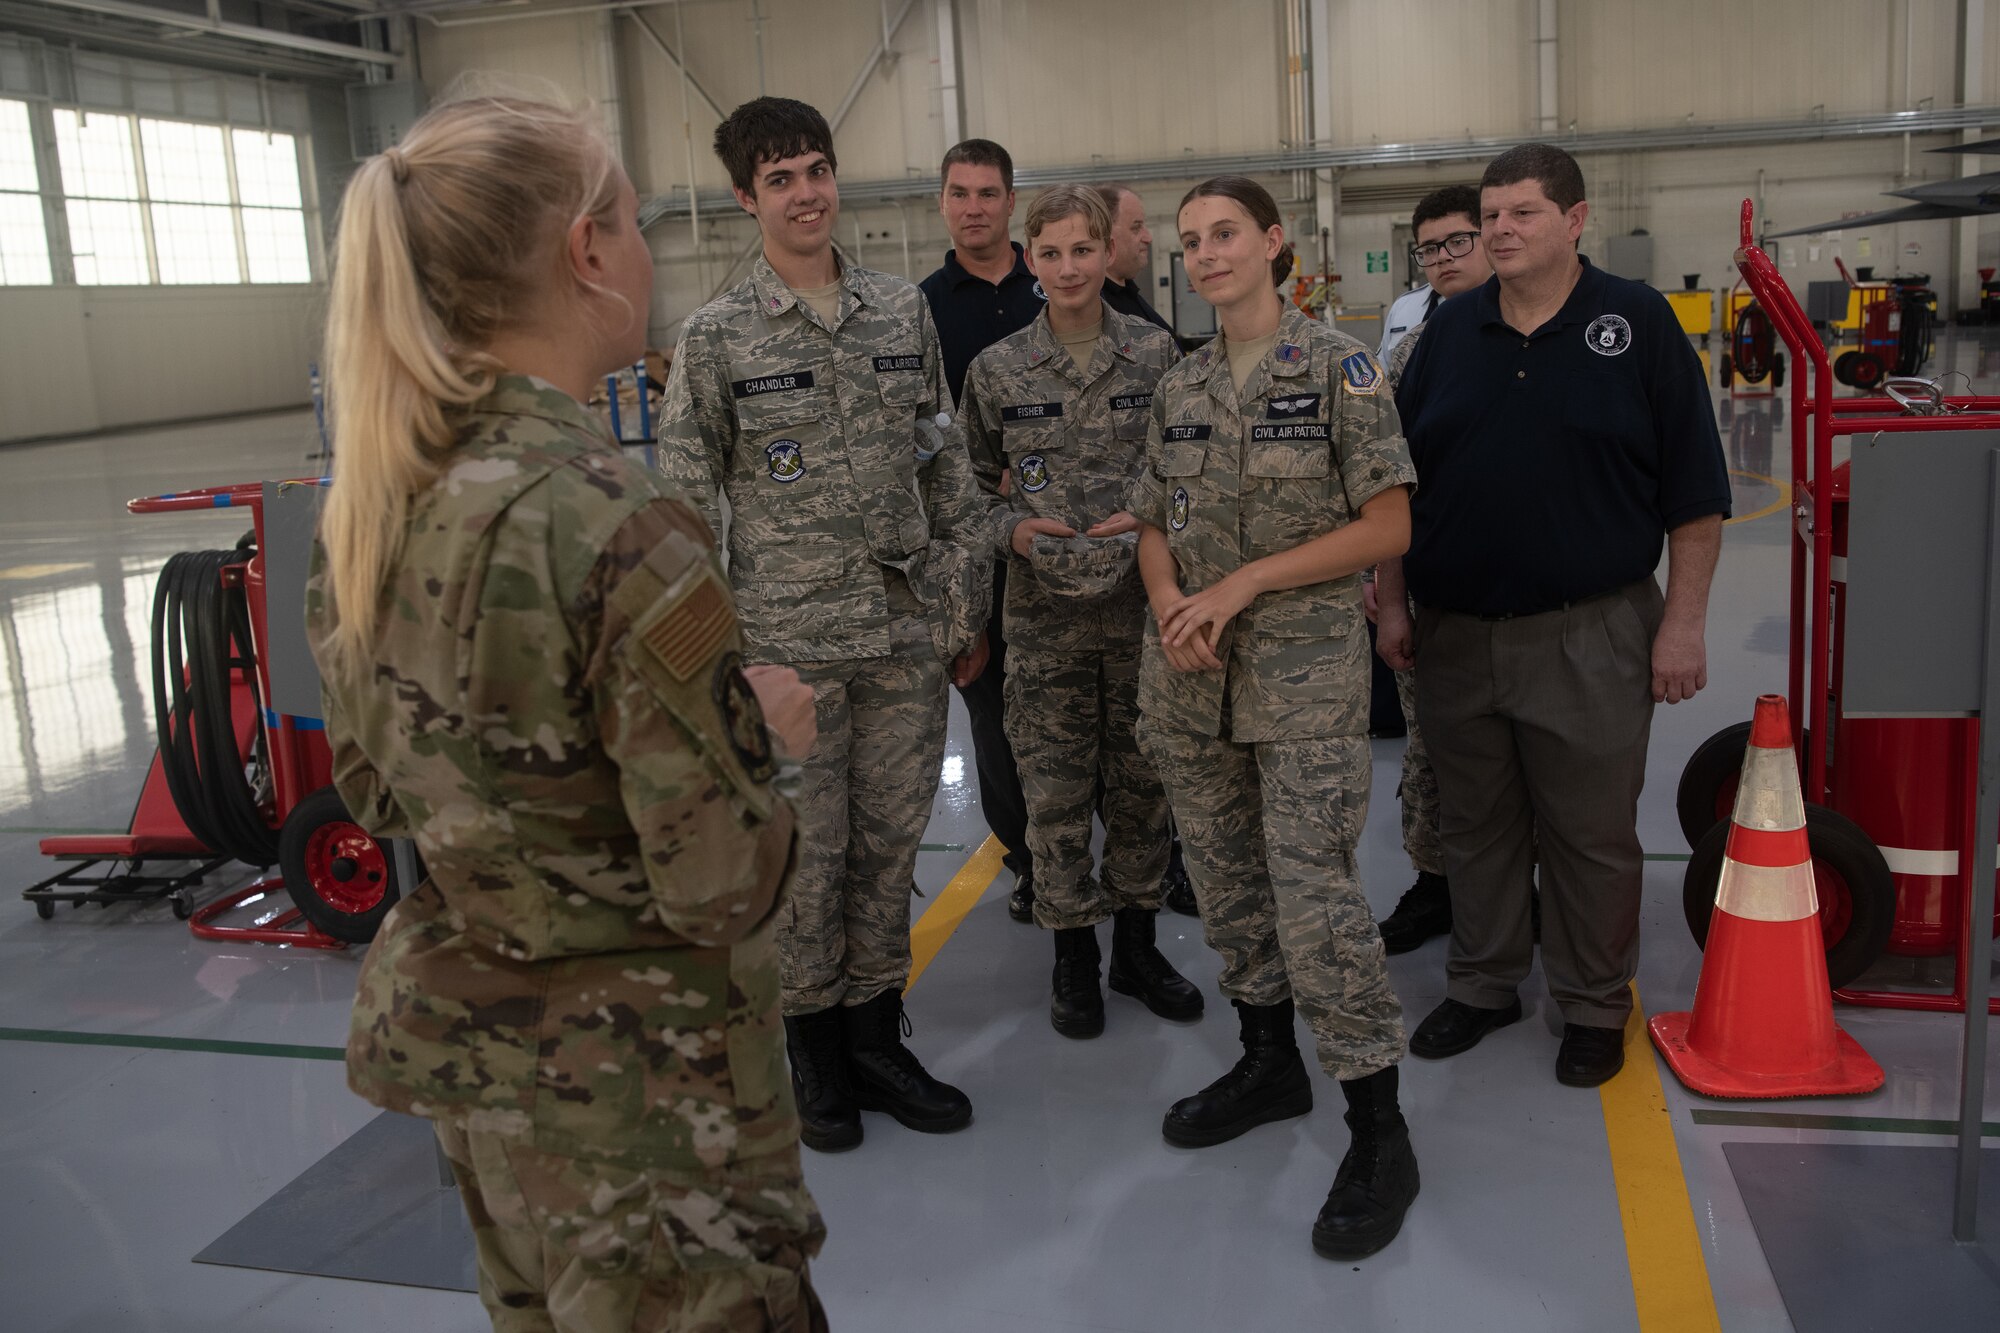 Cadets talking to an Airman.